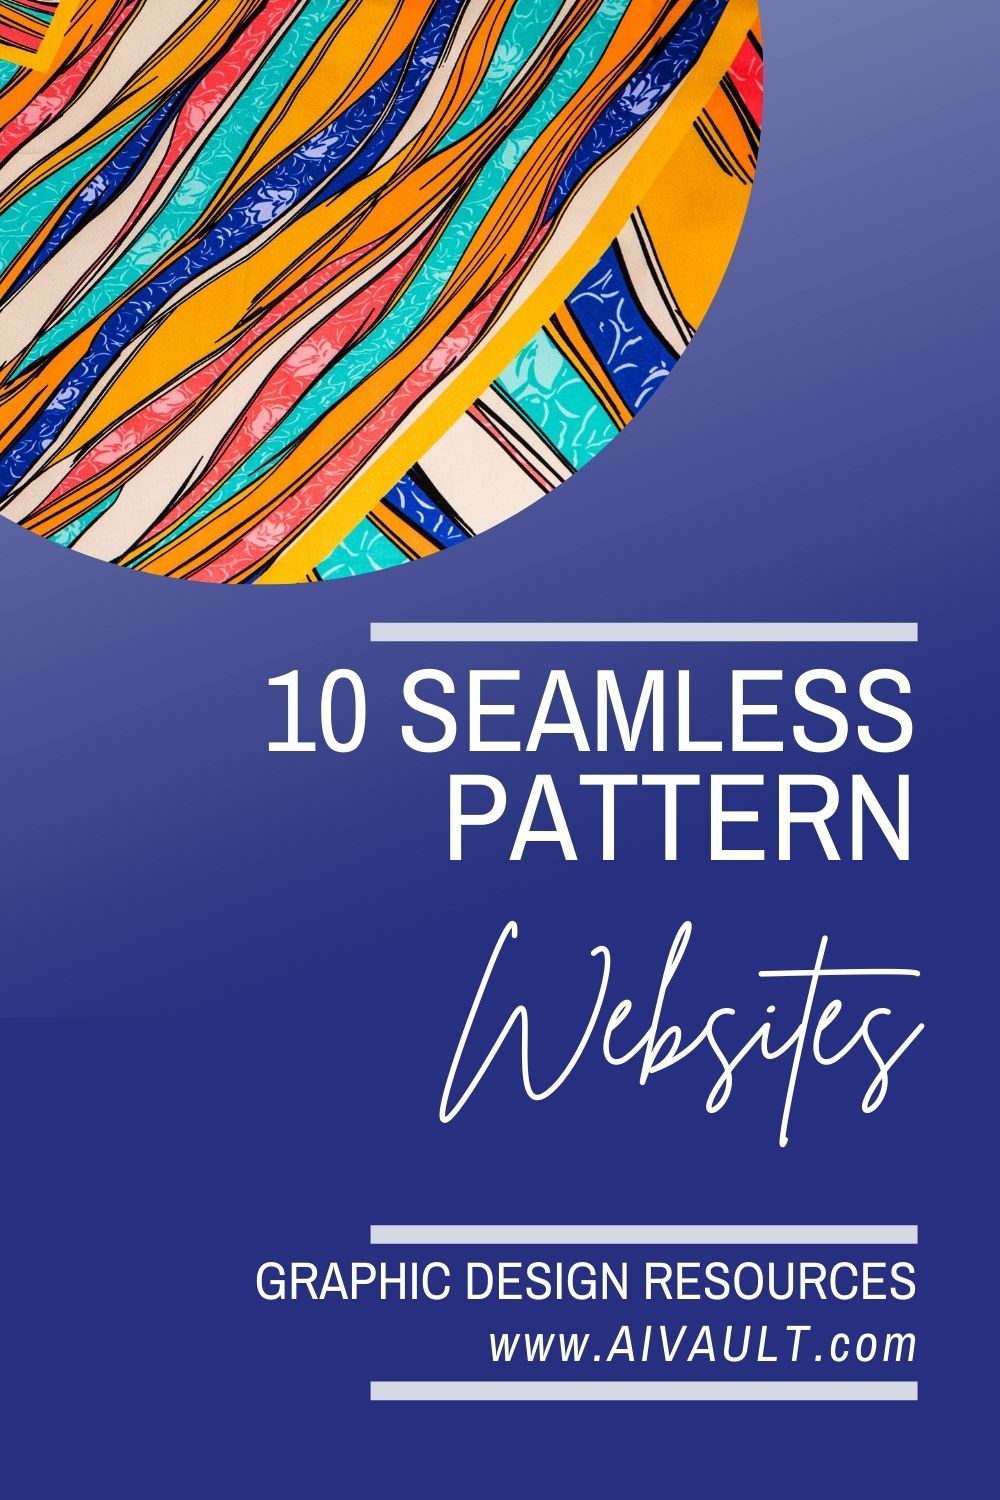 10 Free Seamless Pattern Websites every graphic designer Should know